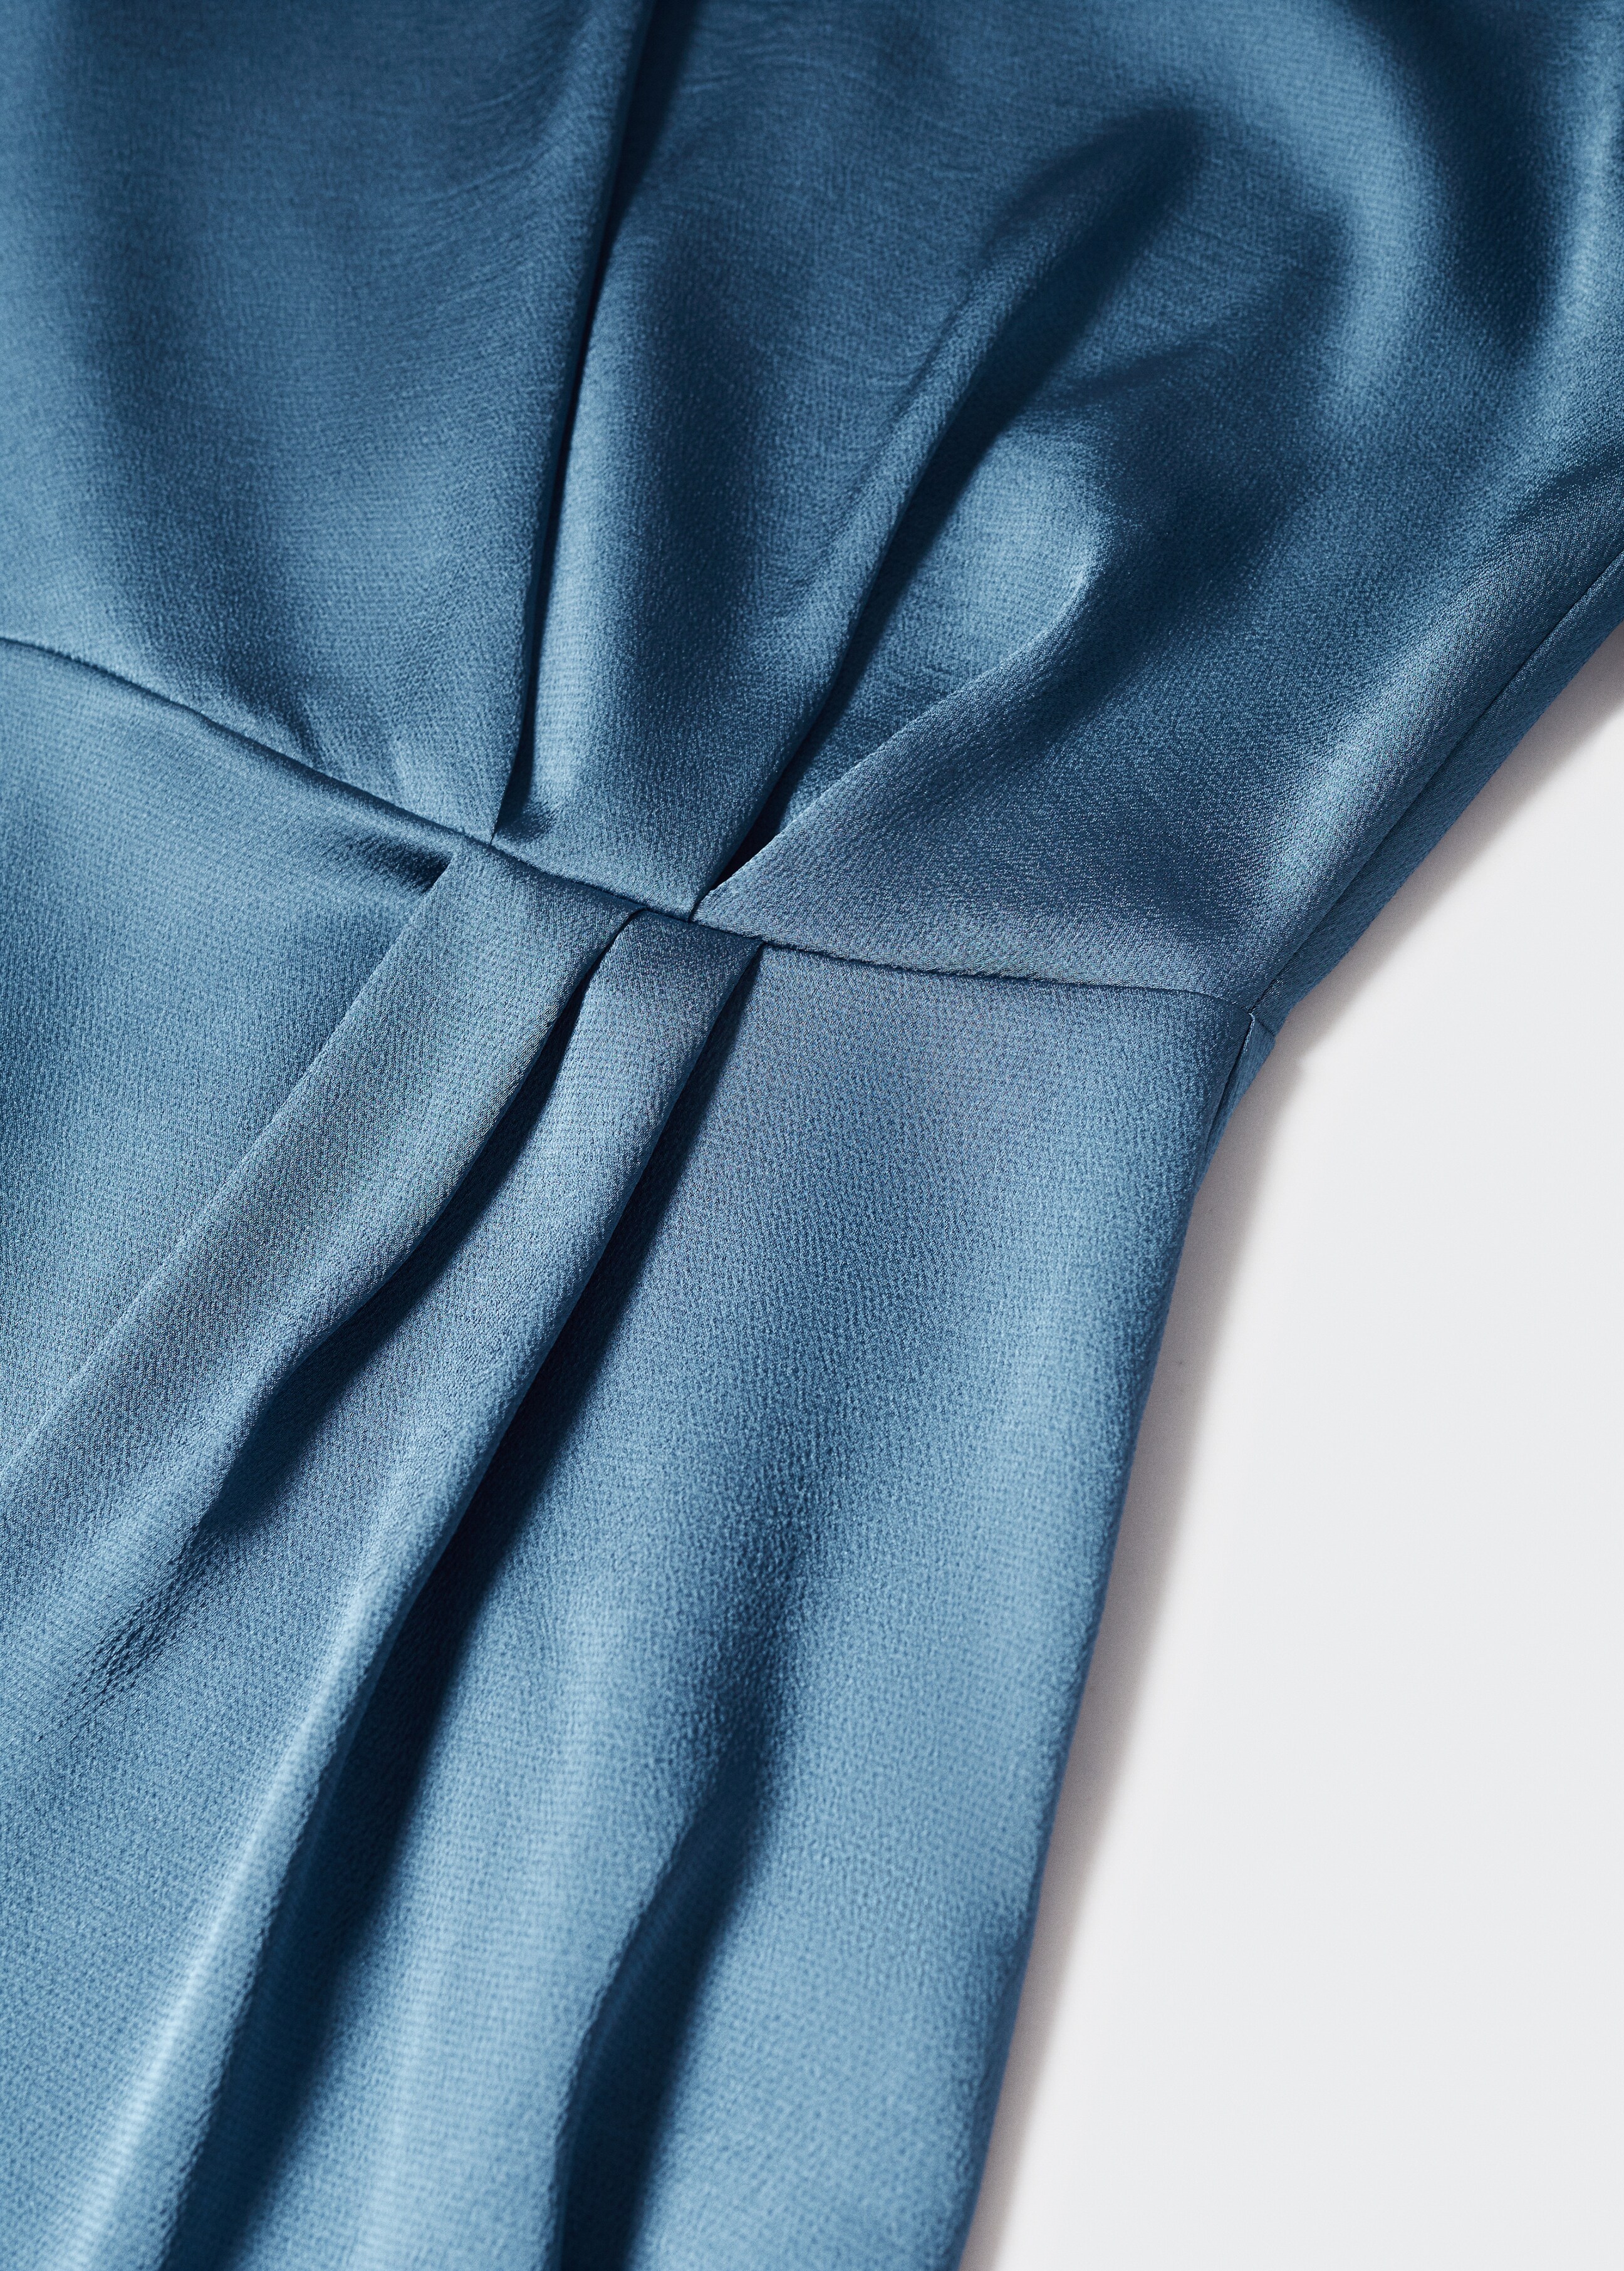 Satin dress - Details of the article 8